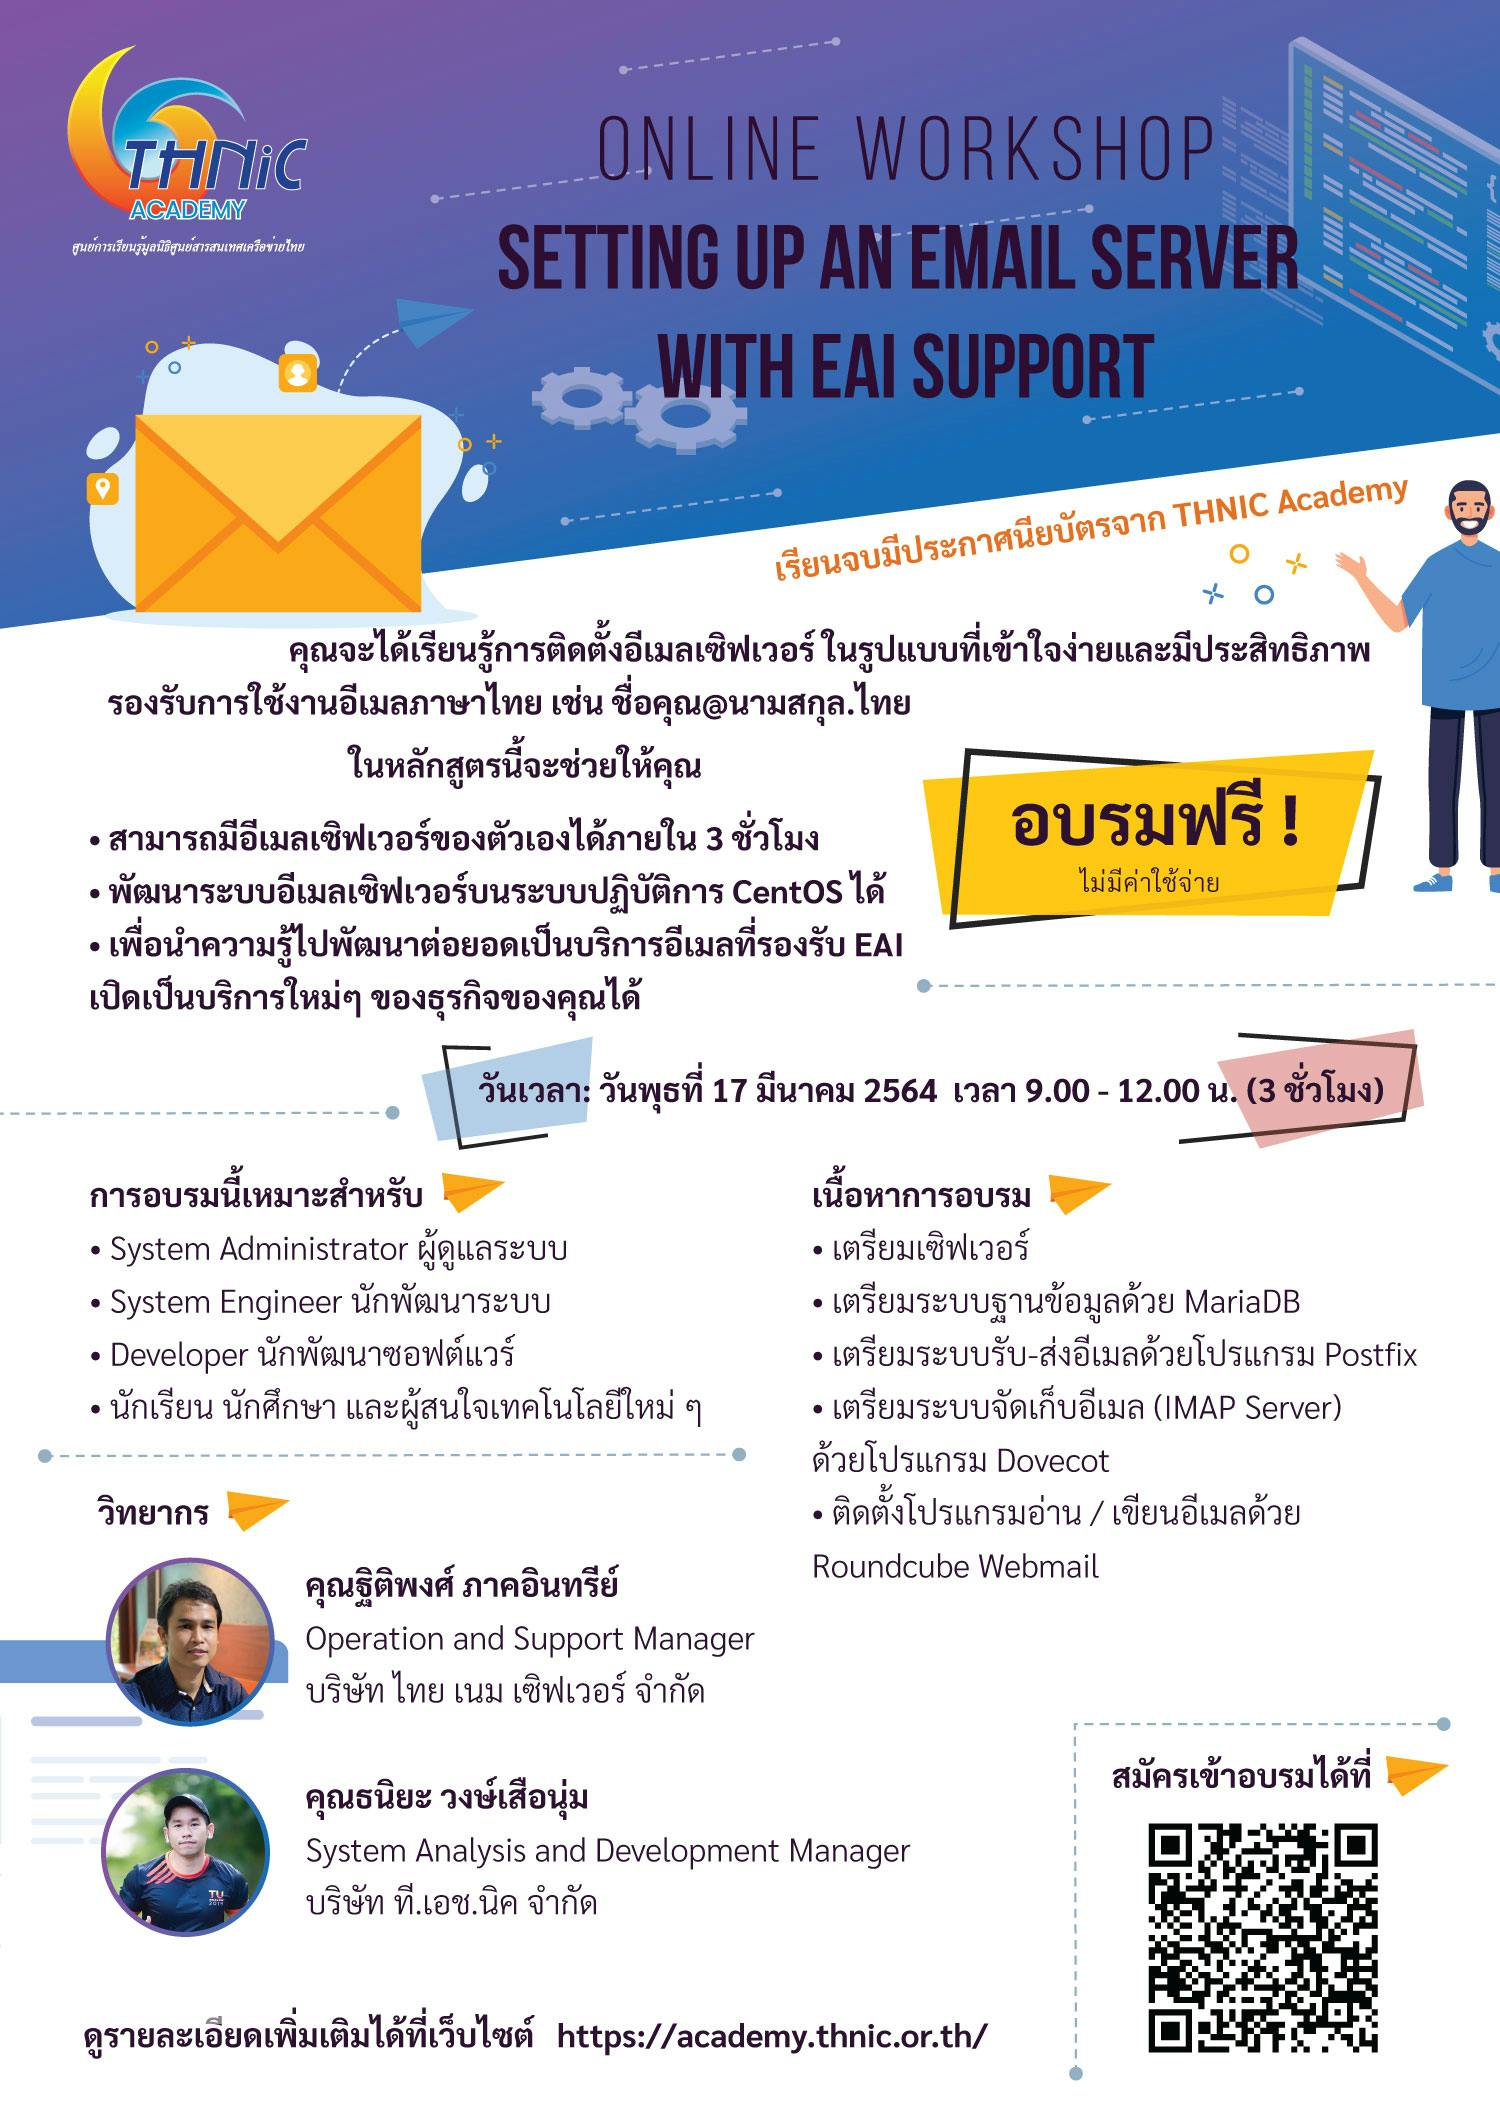 Cover Image for THNIC Academy ขอเชิญเข้าร่วมอบรม – “Online Workshop: Setting up an Email Server with EAI Support”